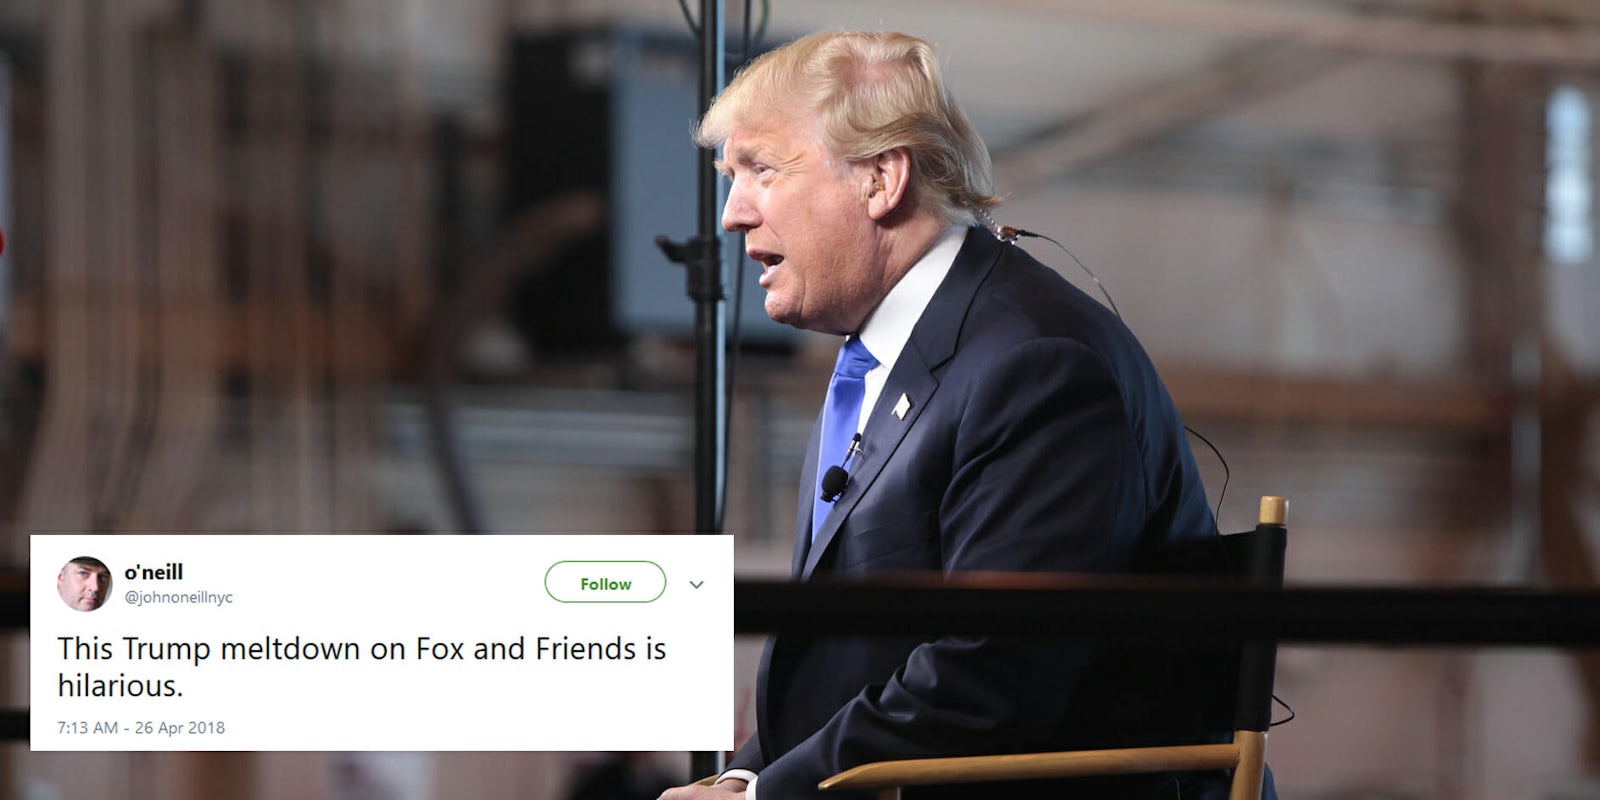 The internet had a lot to say about President Donald Trump's interview on Fox & Friends on Thursday morning.